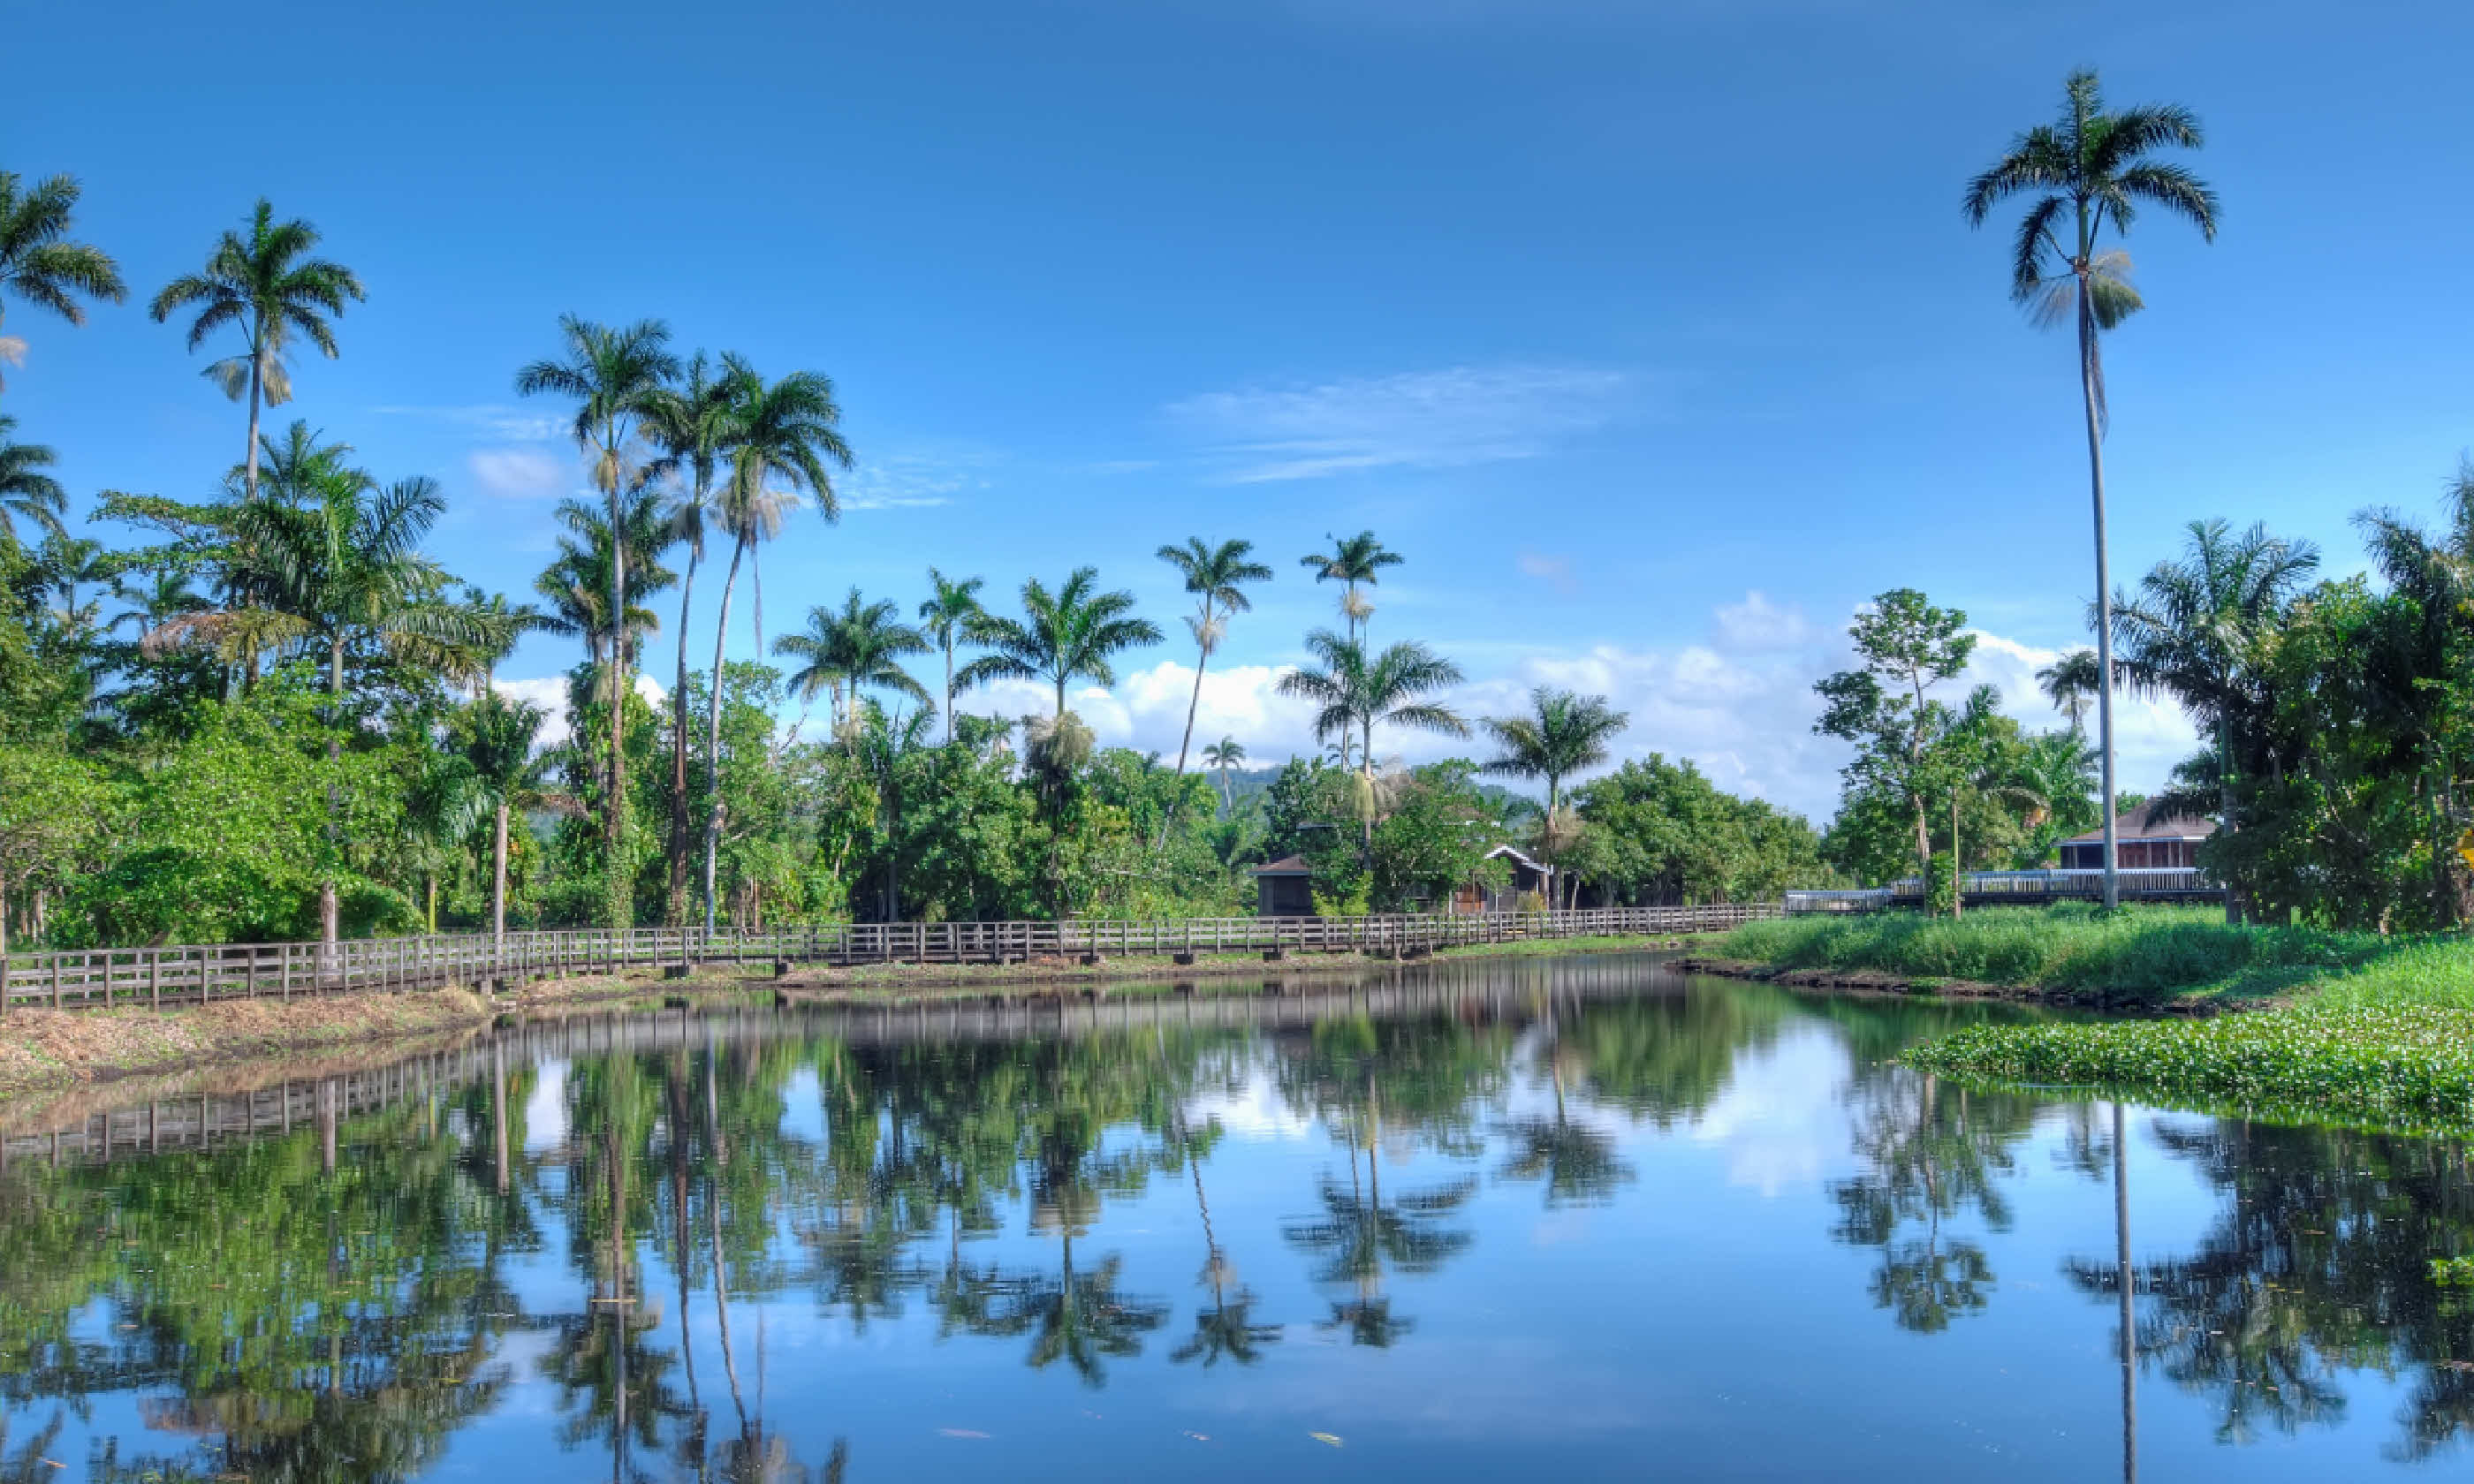 Jamaican landscape with lake and palms (Shutterstock)